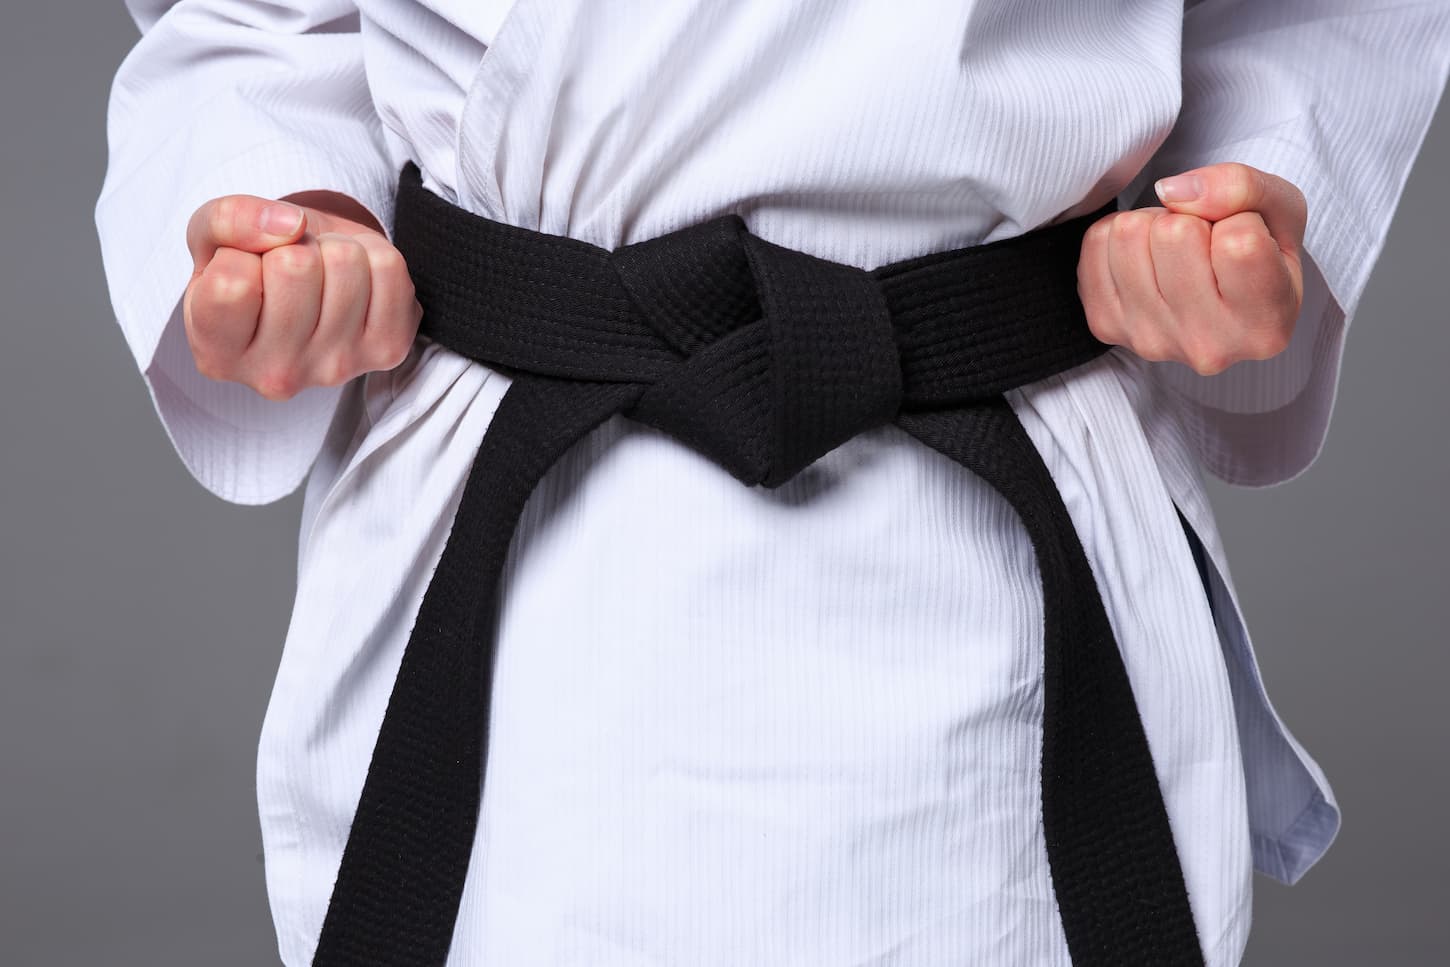 Taekwondo vs Karate for Teens: What’s the Difference?